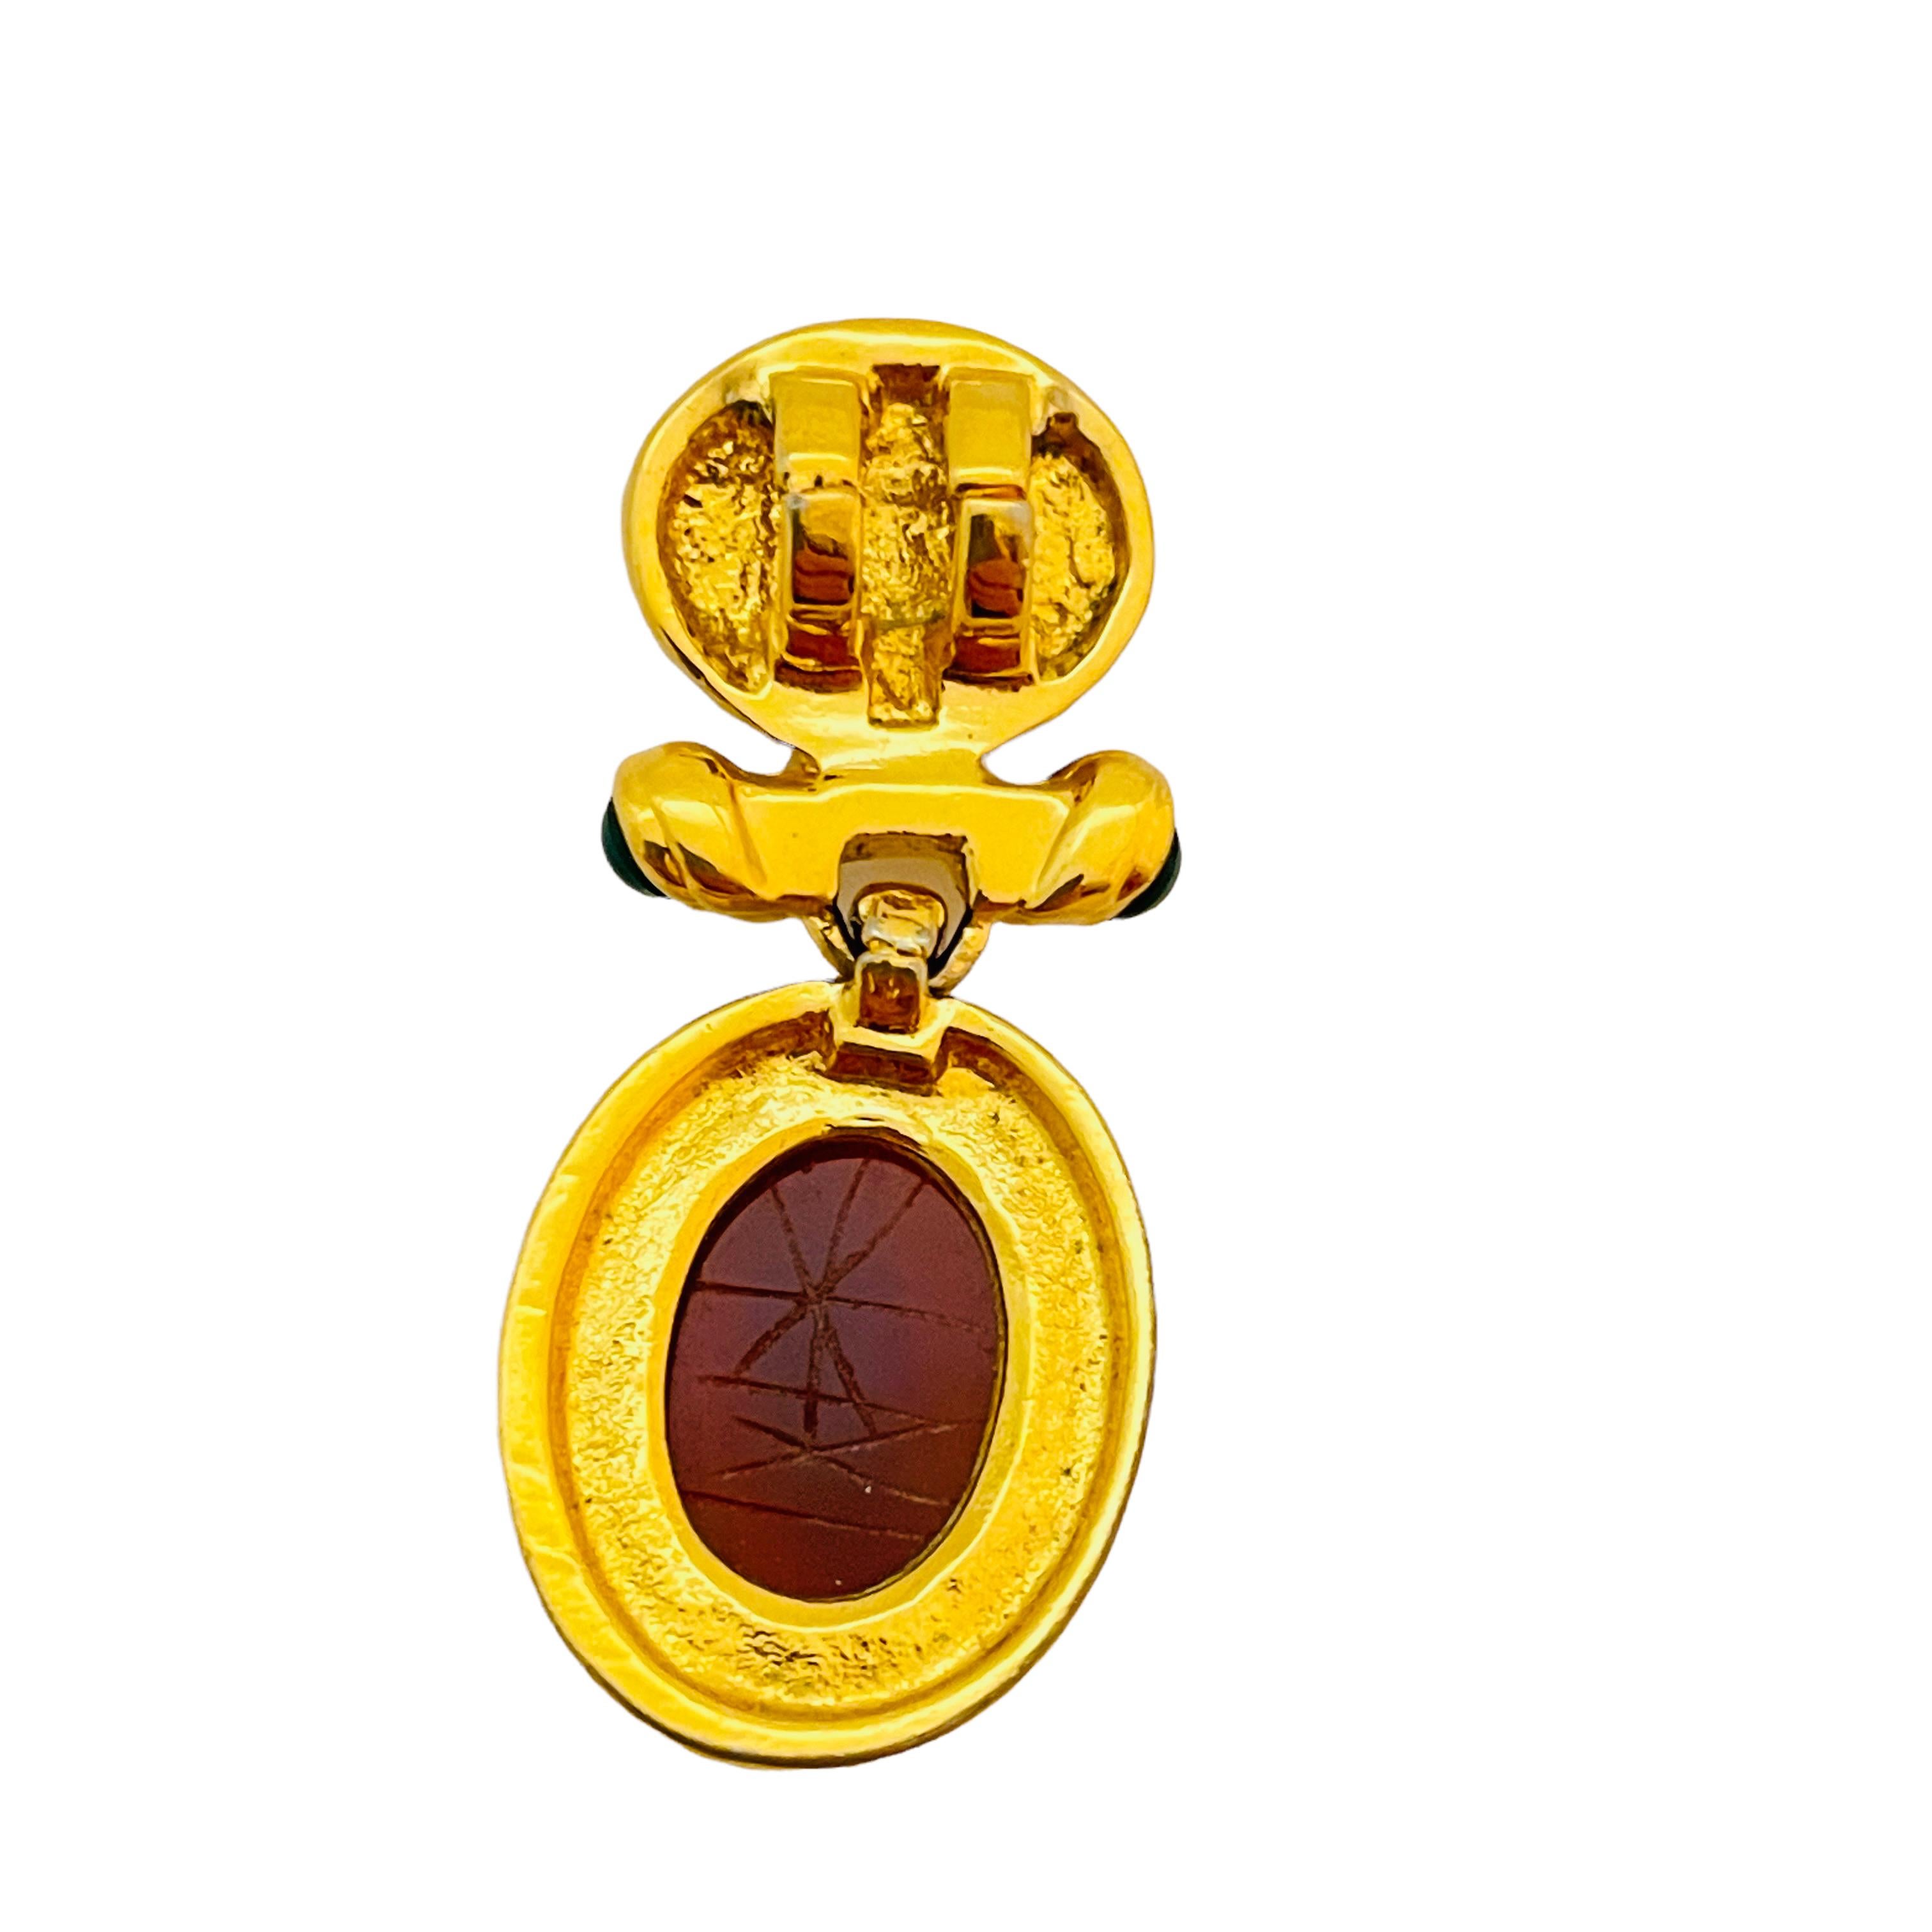 Vtg GIVENCHY gold scarab glass cabochon pendant necklace designer runway In Good Condition For Sale In Palos Hills, IL